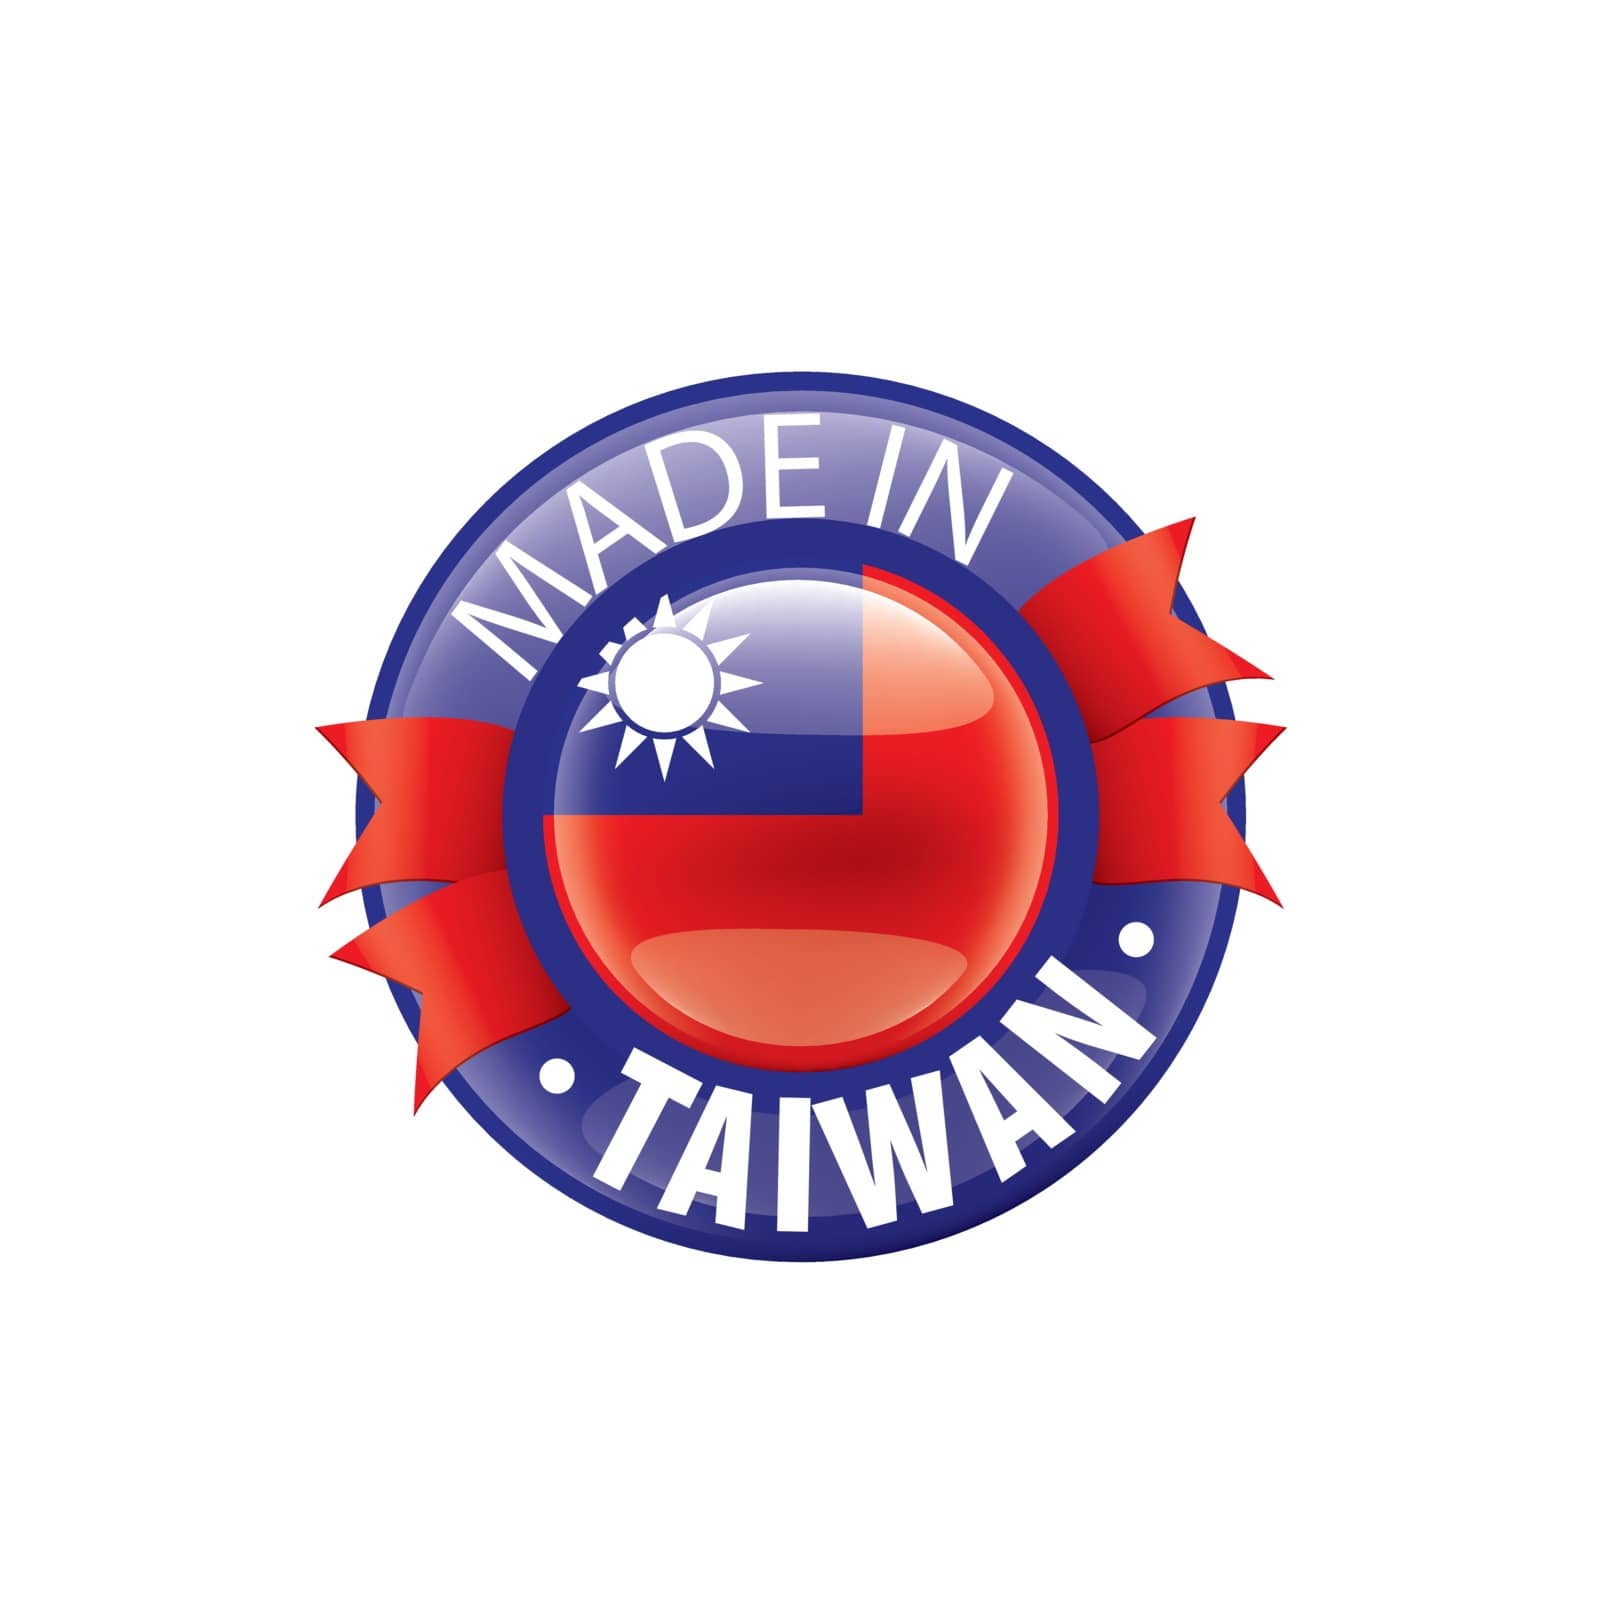 Taiwan flag, vector illustration on a white background by butenkow